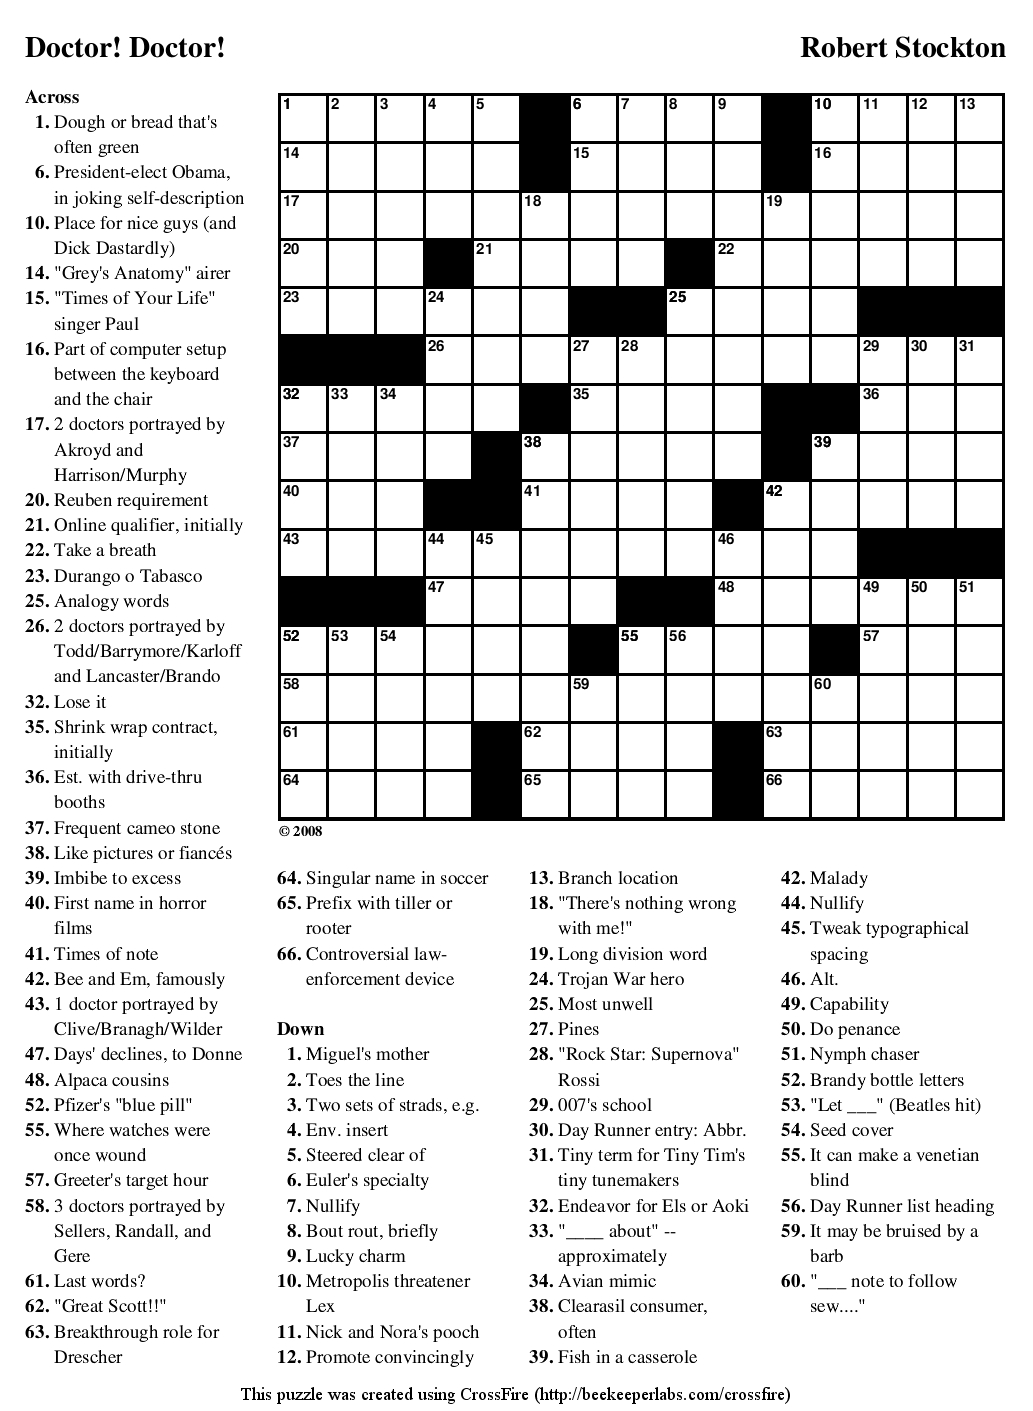 Crossword Puzzles Printable - Yahoo Image Search Results | Crossword - Printable Crossword Puzzles May 2019